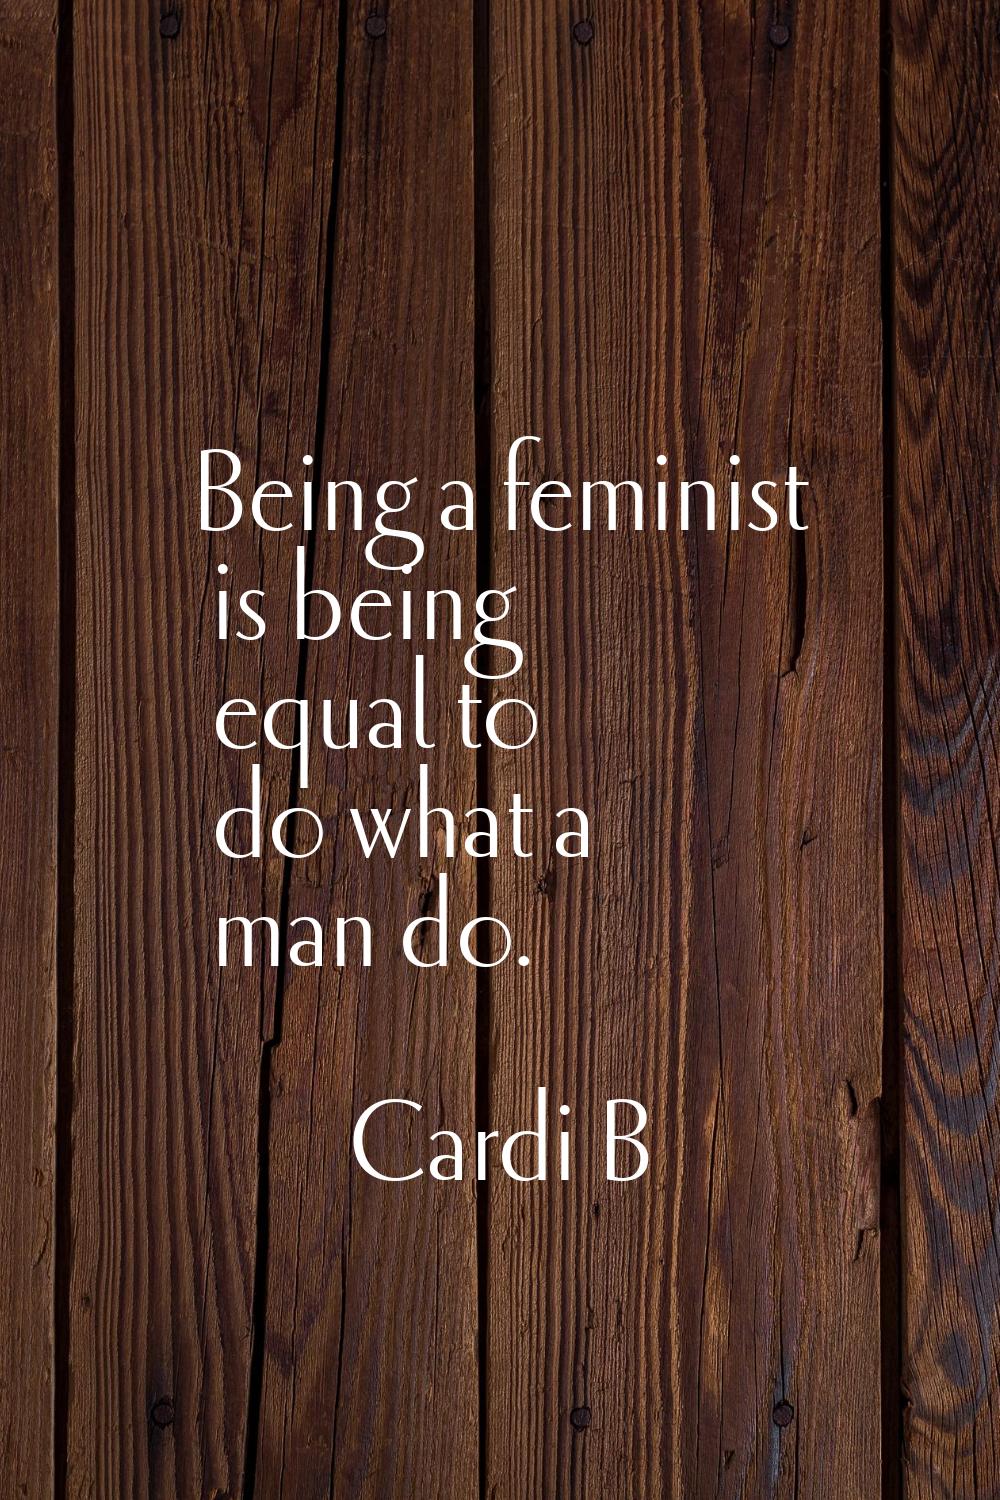 Being a feminist is being equal to do what a man do.